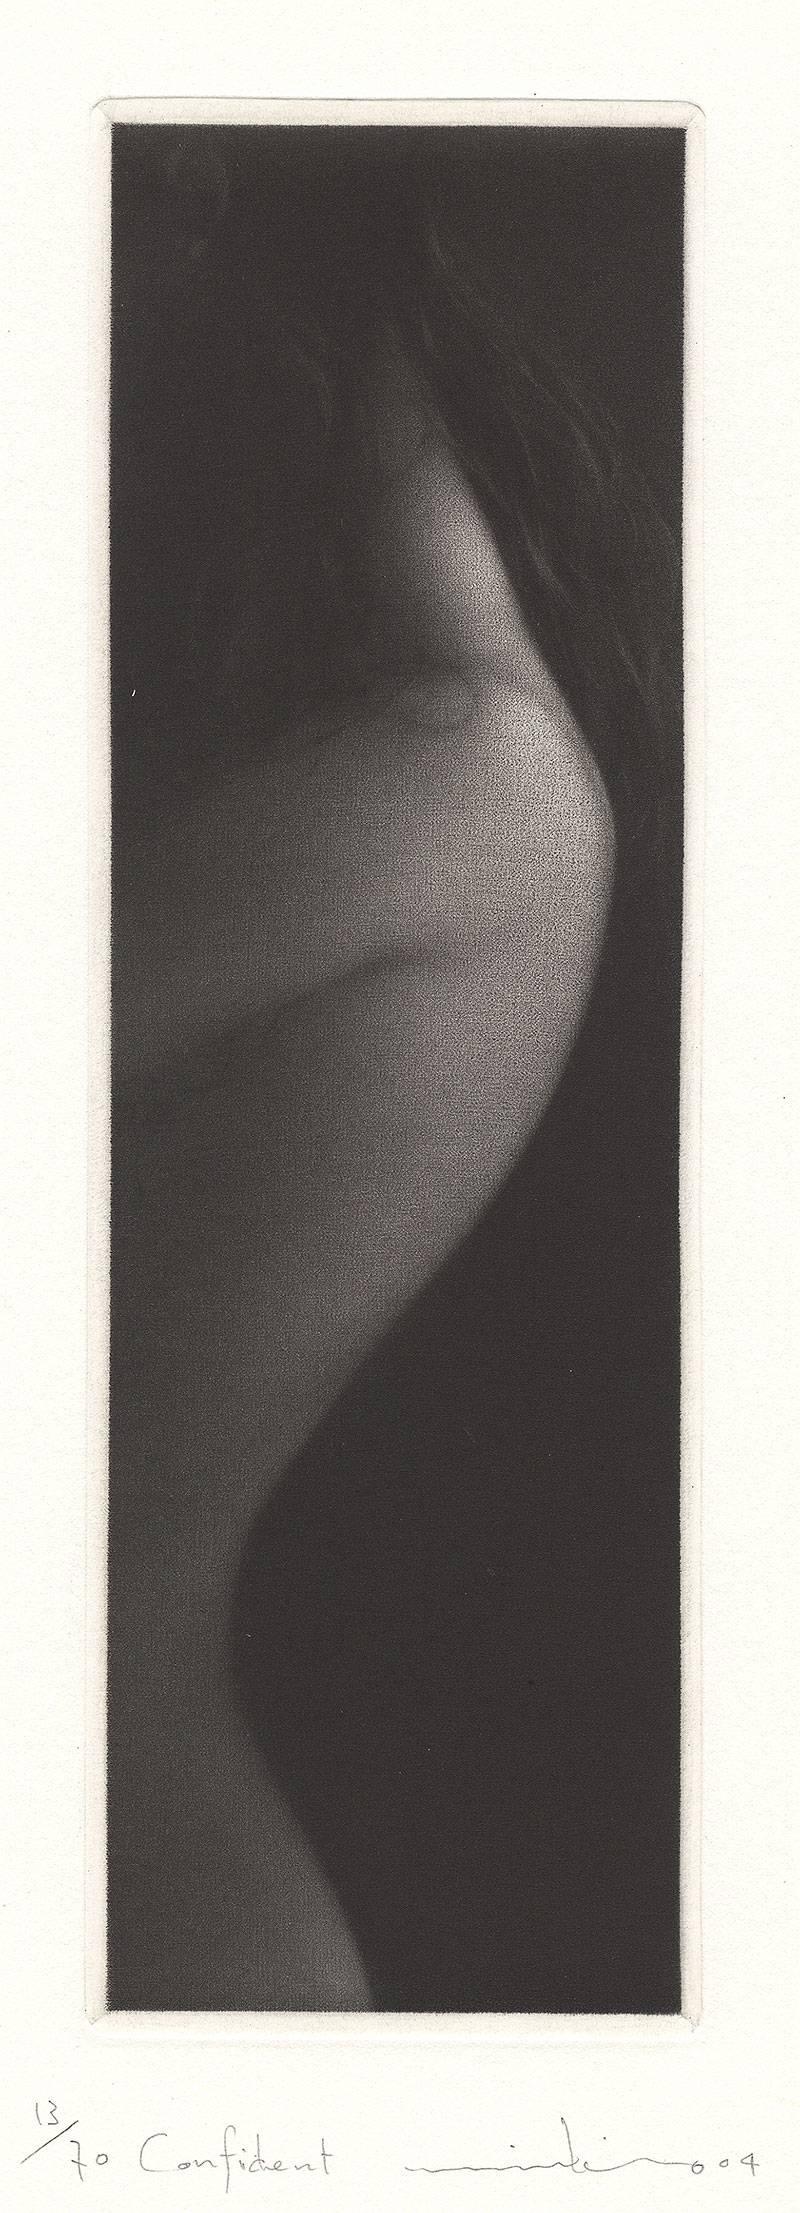 Mikio Watanabe Figurative Print - Confident (profile of young nude girl both sultry and innocent at same time)